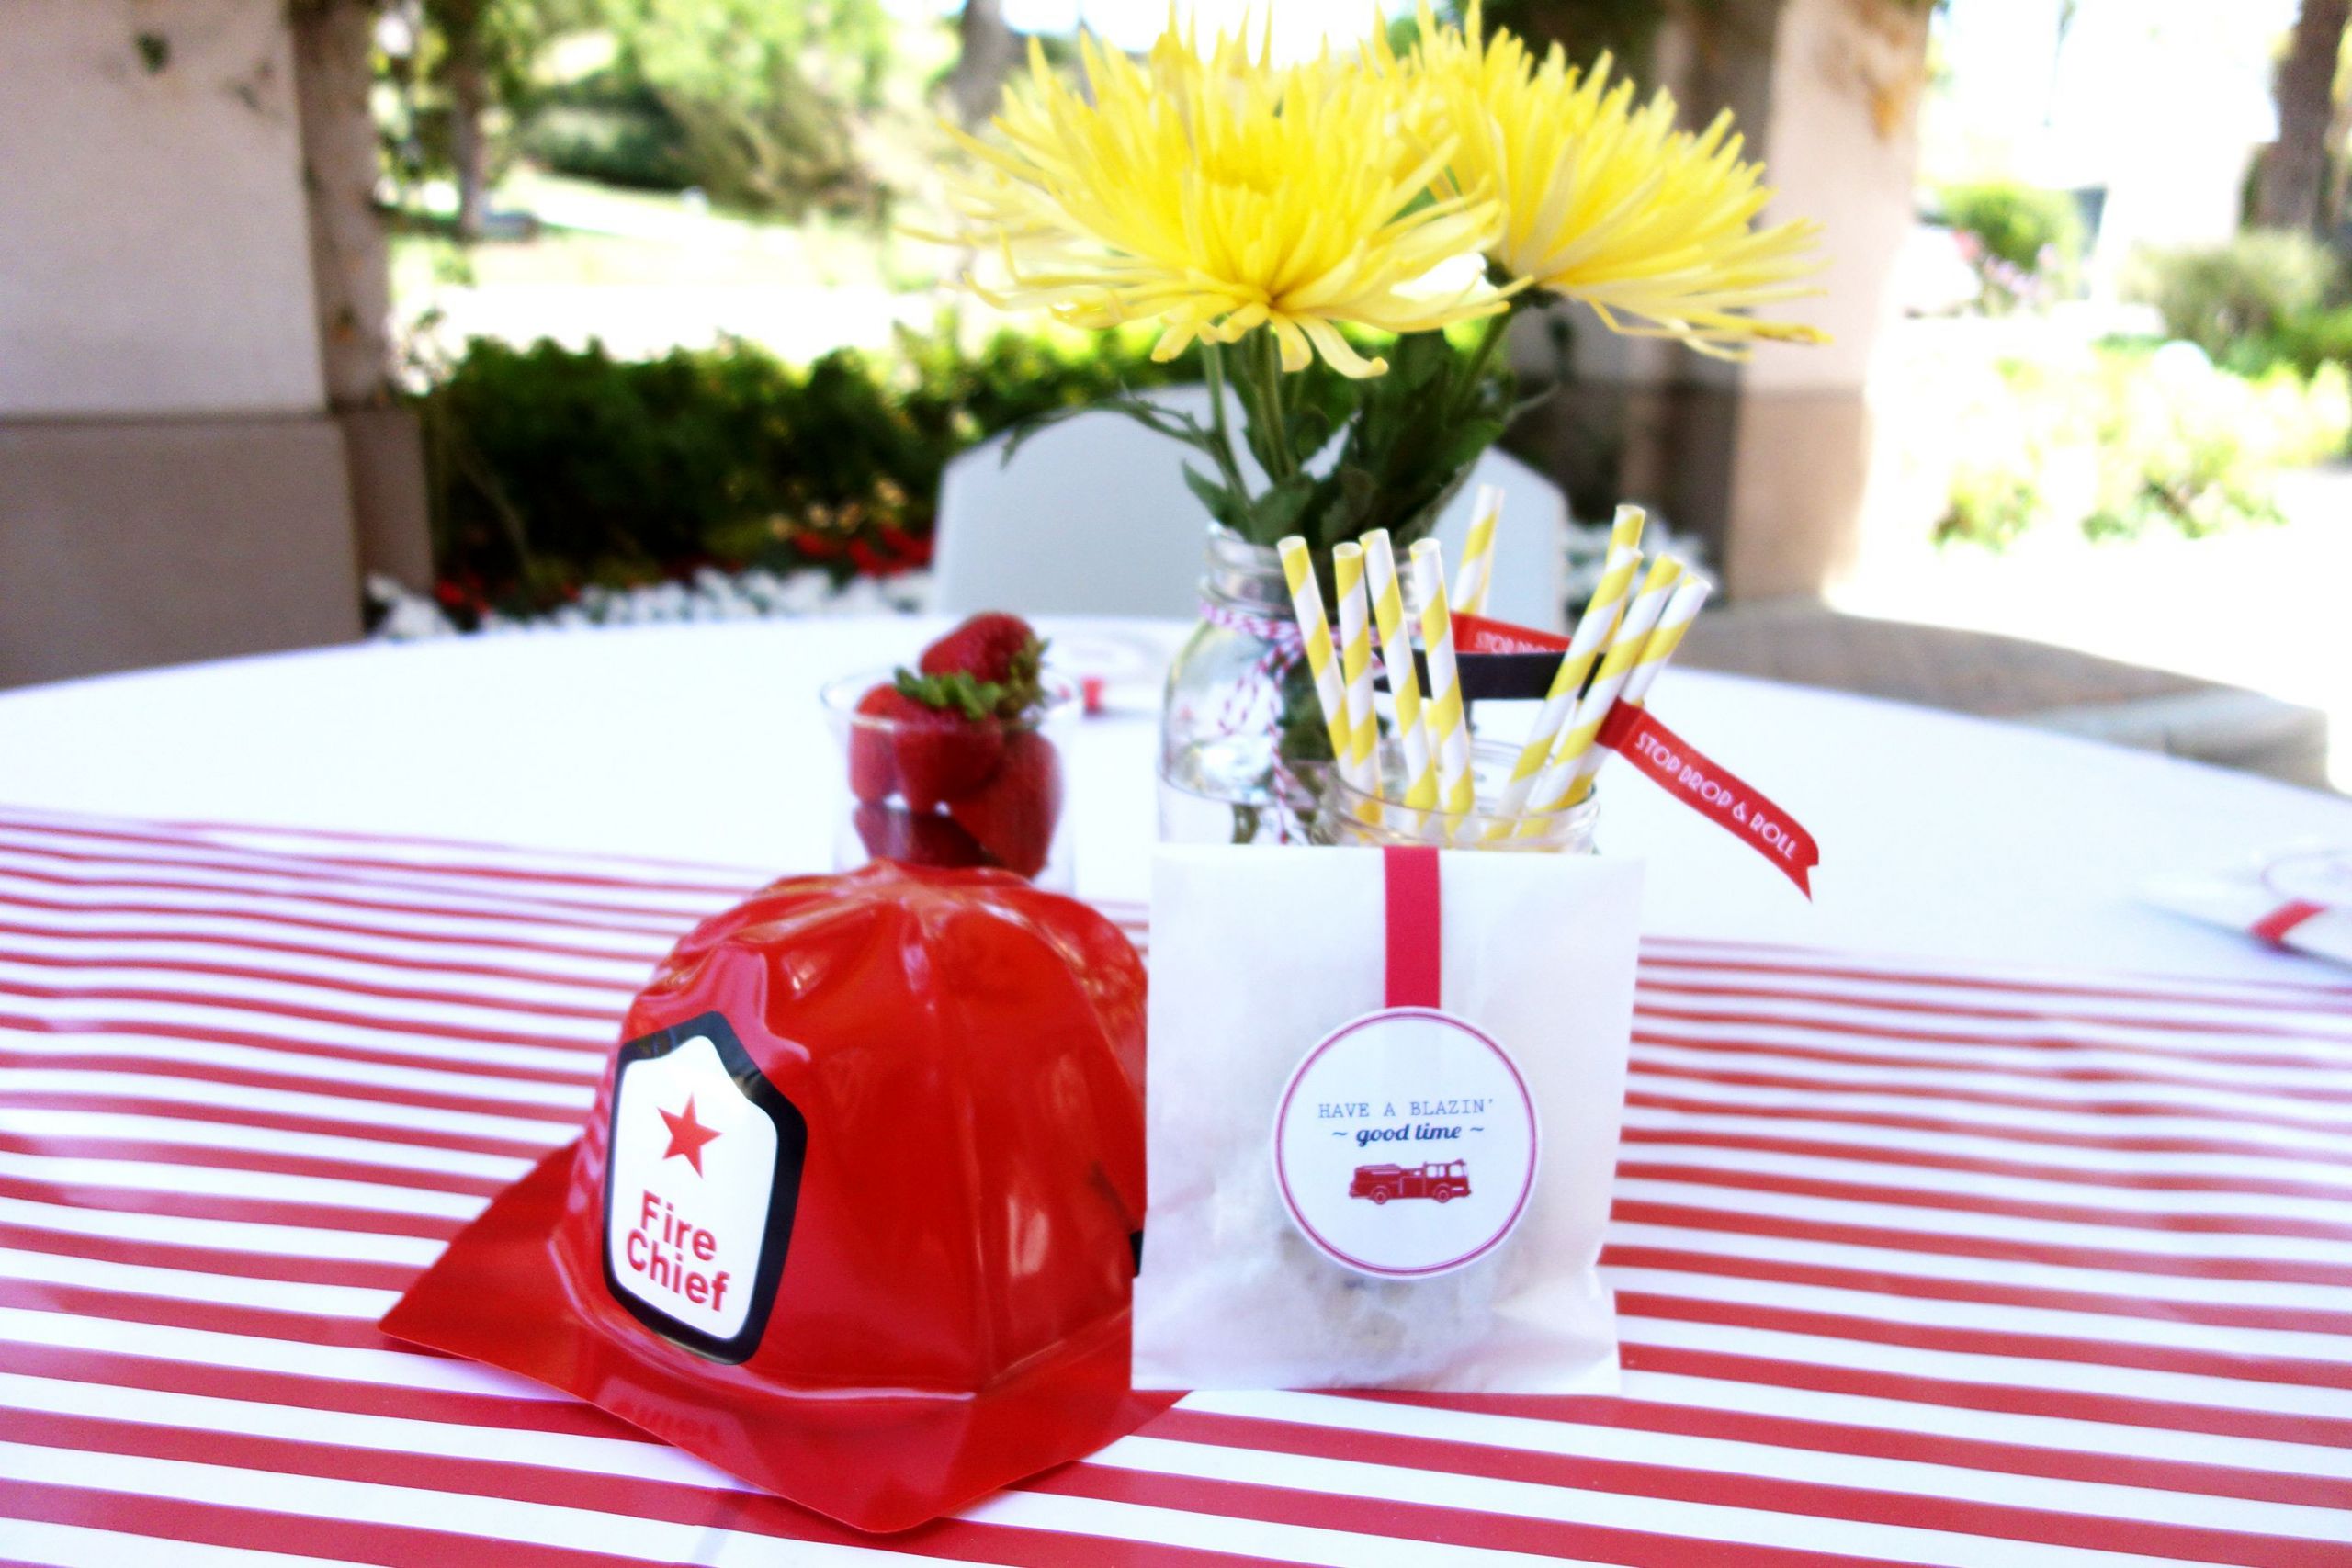 Firefighter Retirement Party Ideas
 Firefighter Party Adult Tablescapes